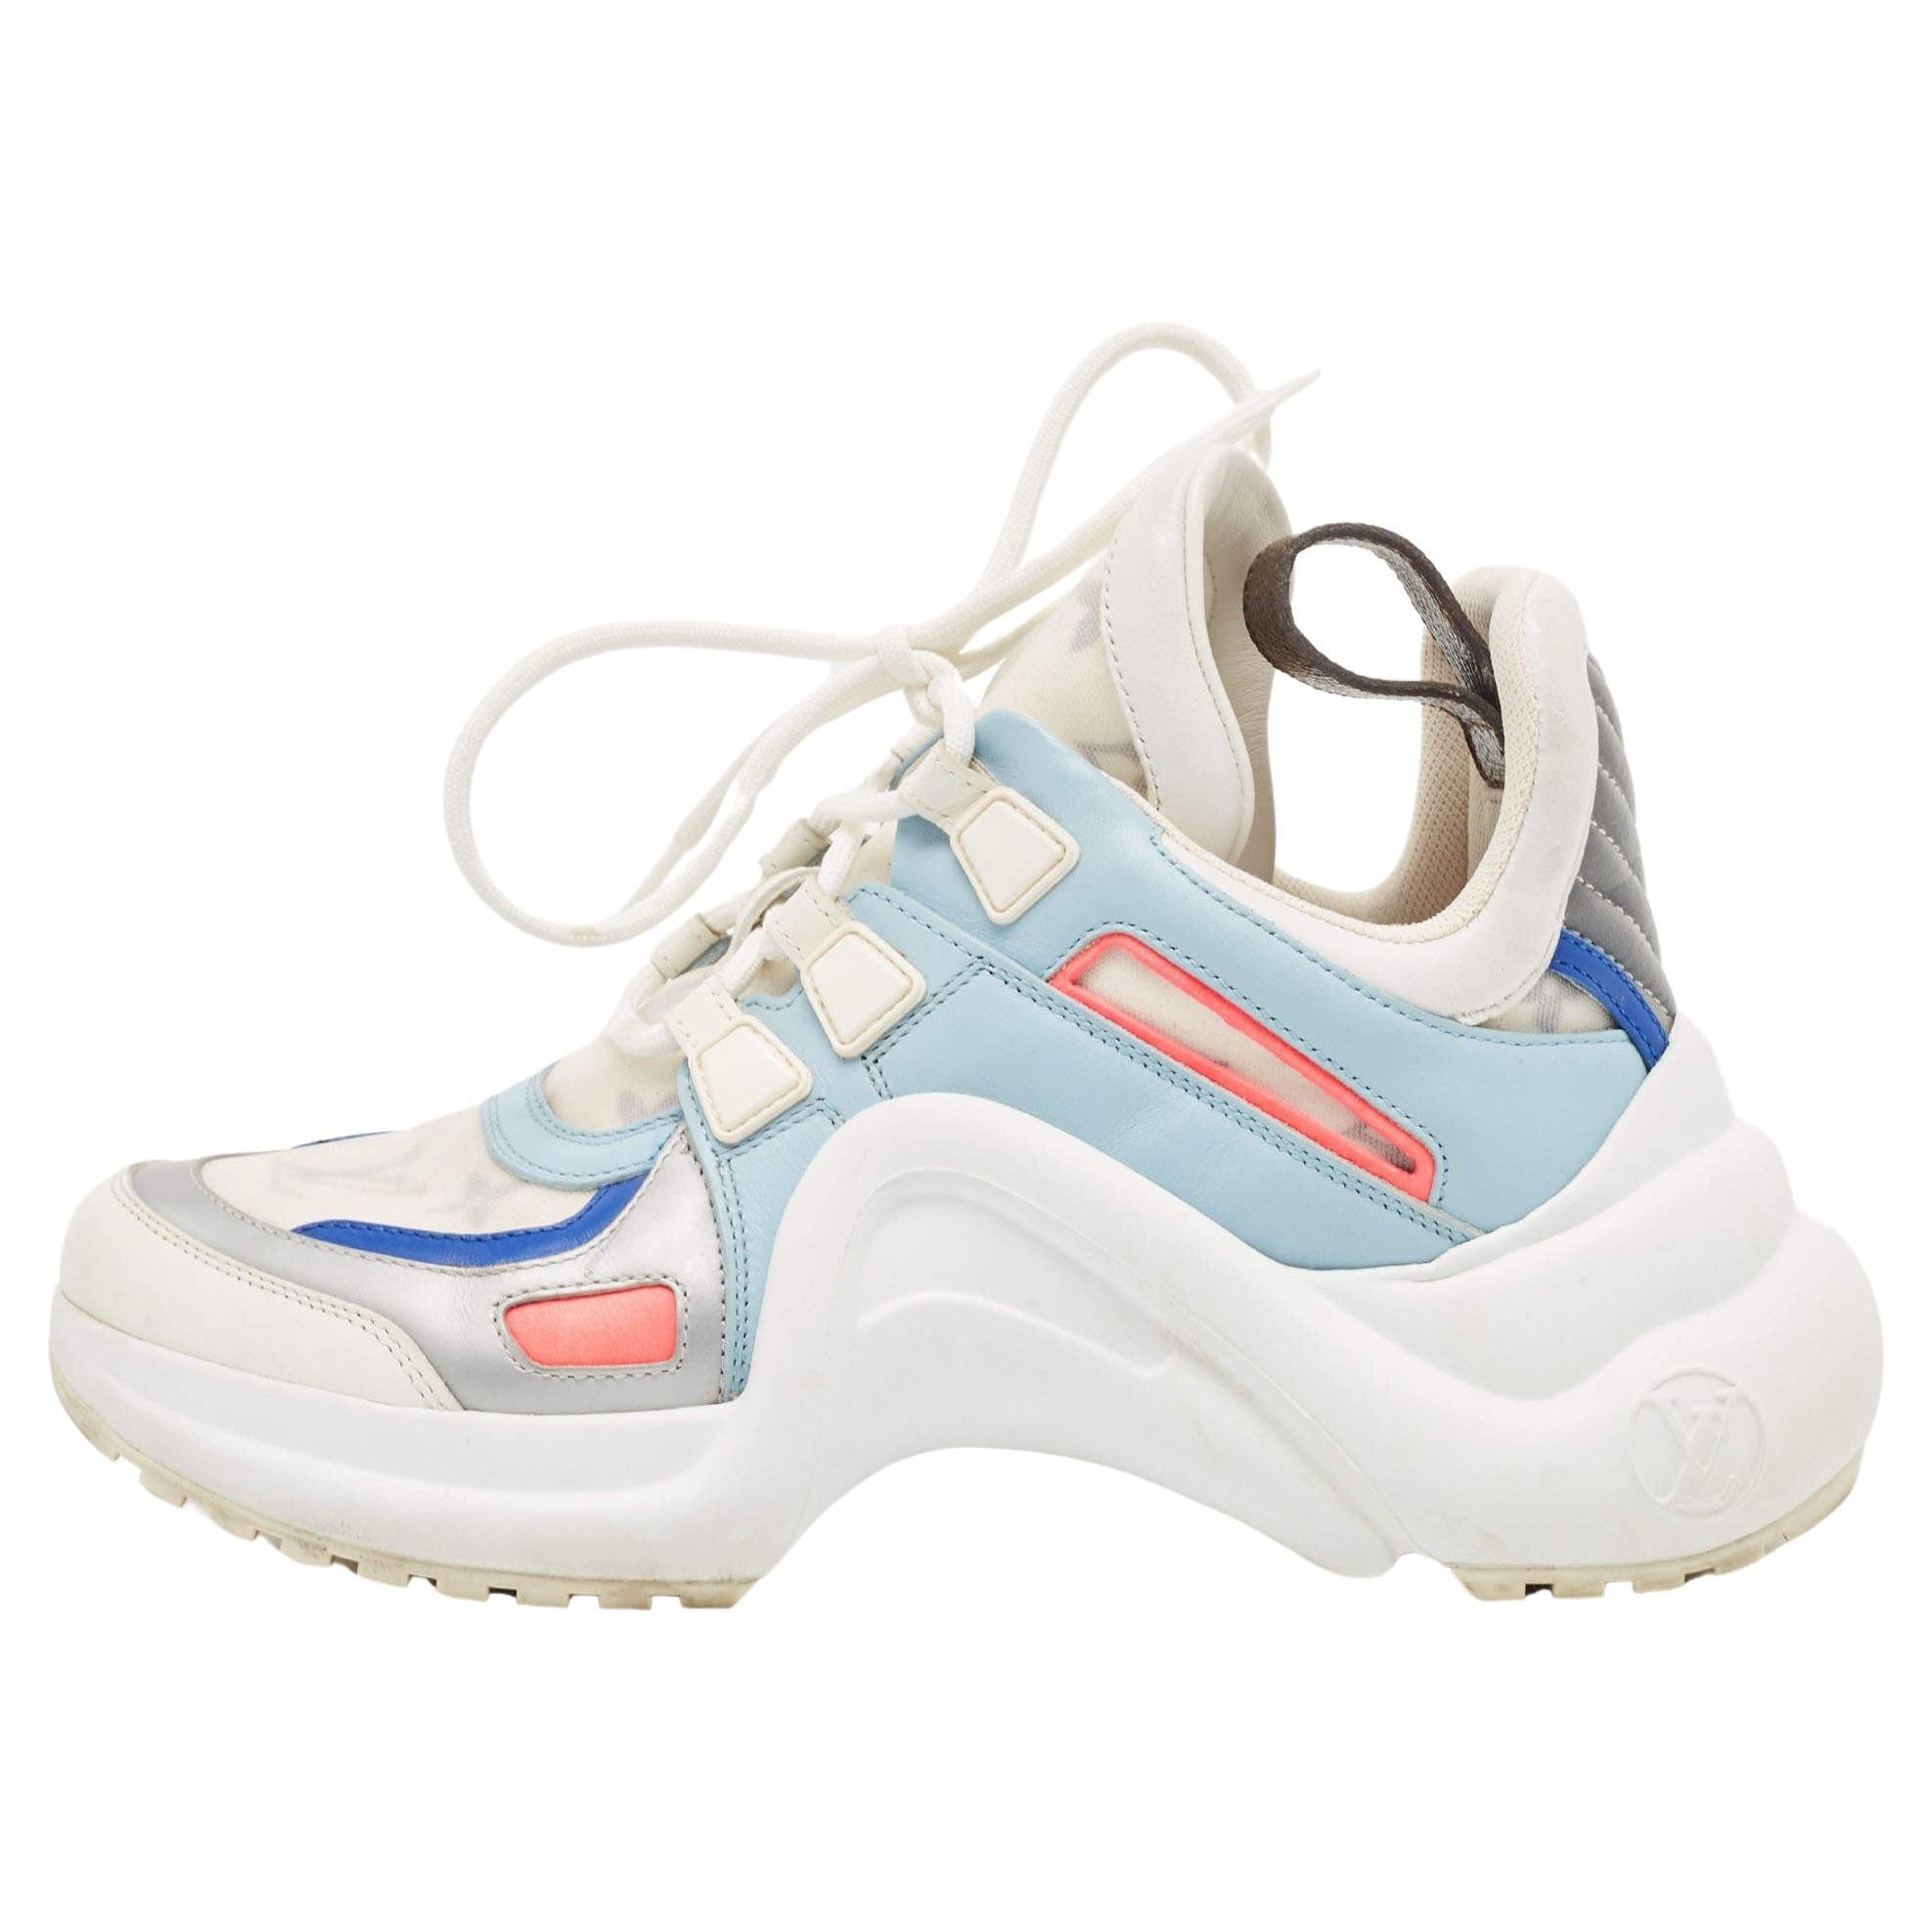 Louis Vuitton Archlight - 27 For Sale on 1stDibs | lv archlight sneaker  price, louis vuitton archlight sneakers, louis vuitton archlight price